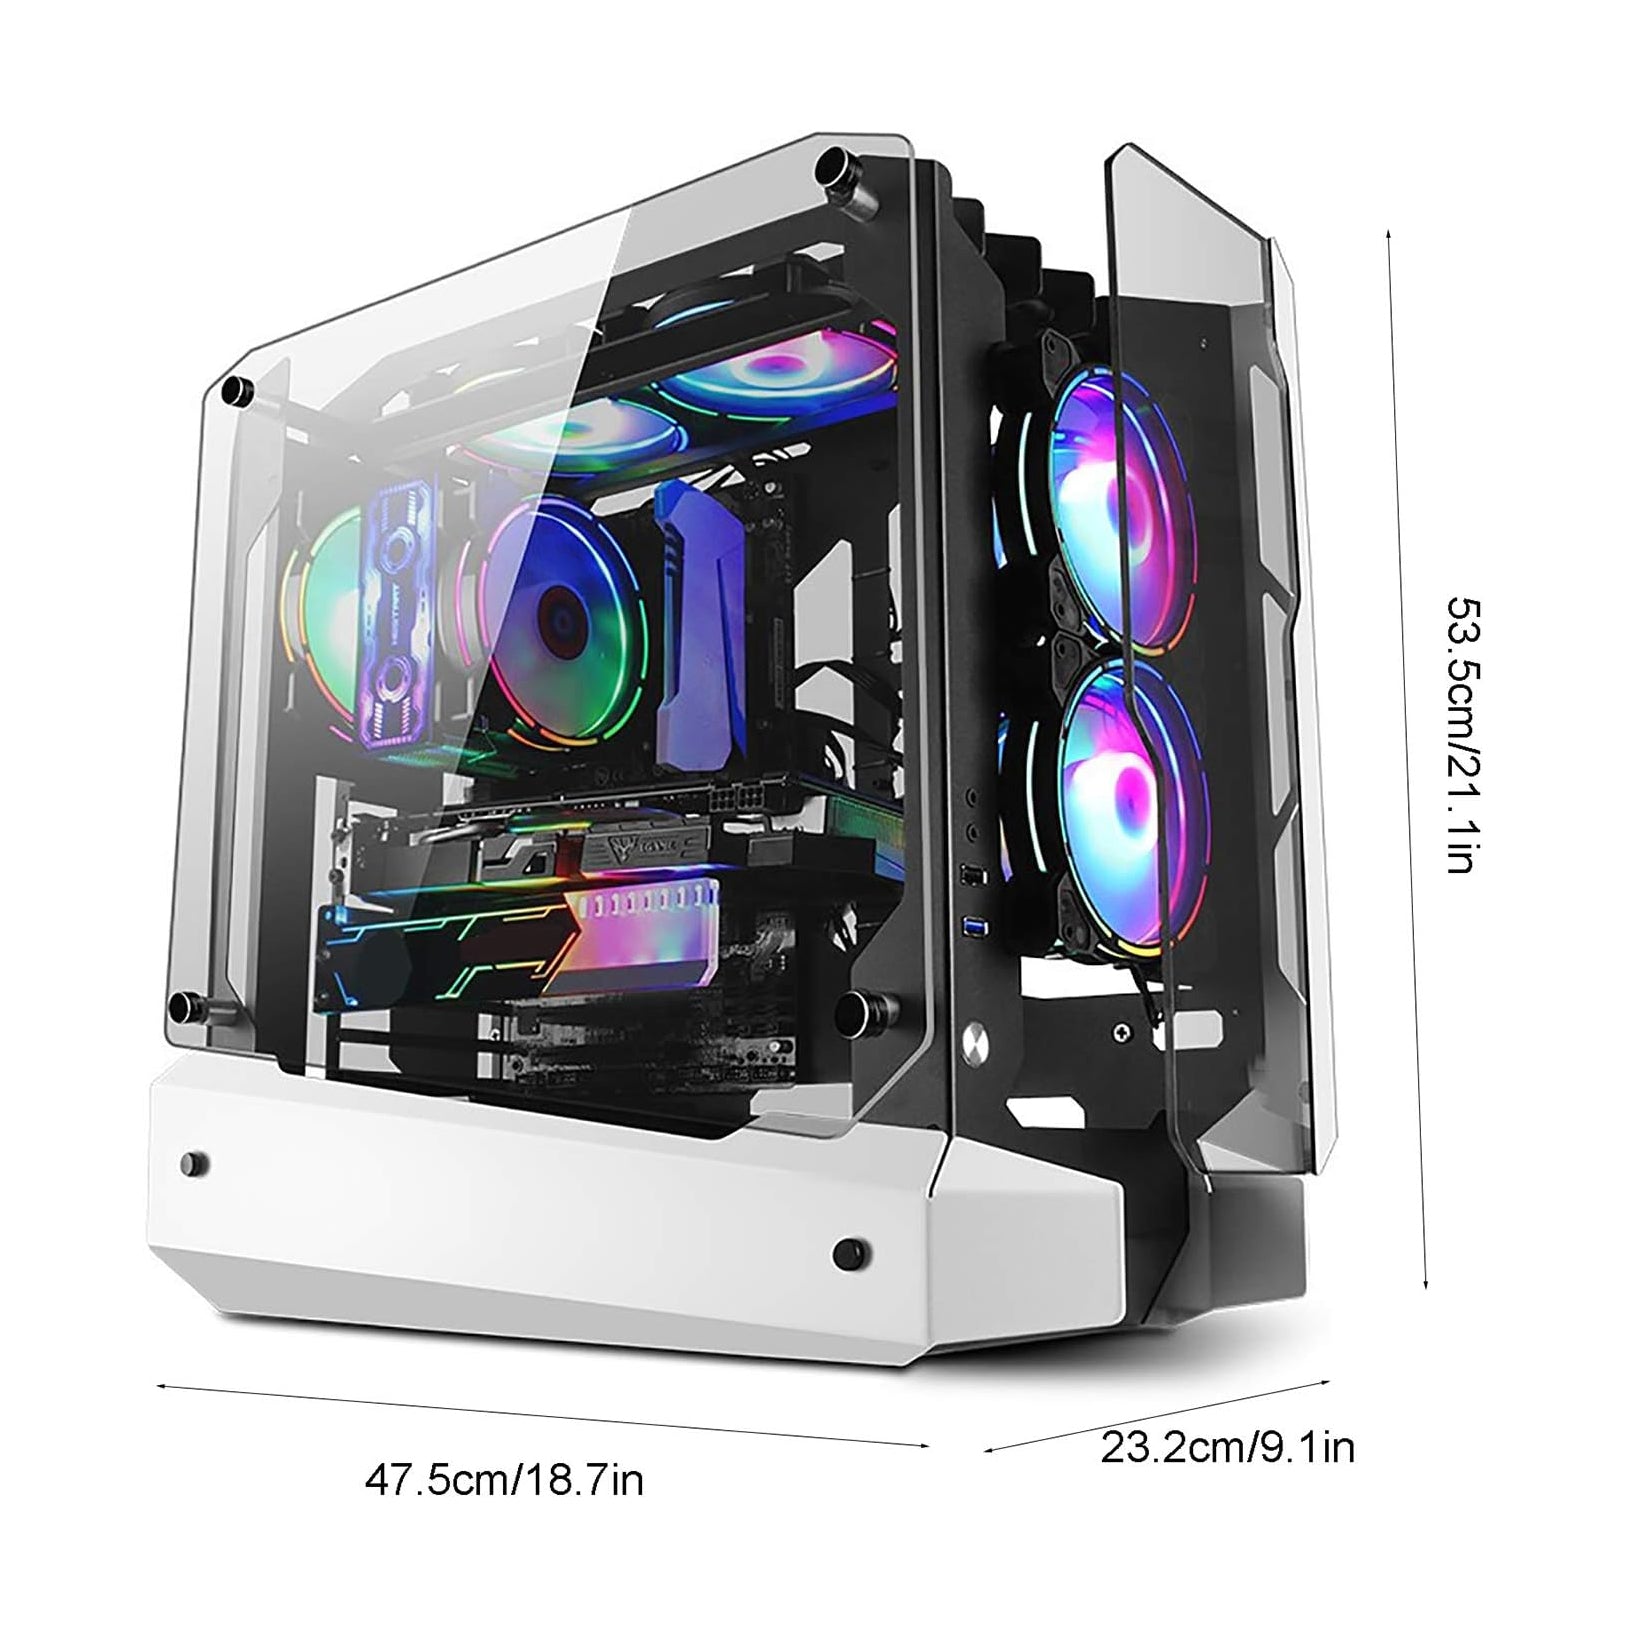 Ark ATX Mid-Tower PC Gaming Case, Non-Closed Case Tempered Glass Panel, 5 x Case Fans Installation Position - Front IO USB 3.0 Port, White - Not Include Fans